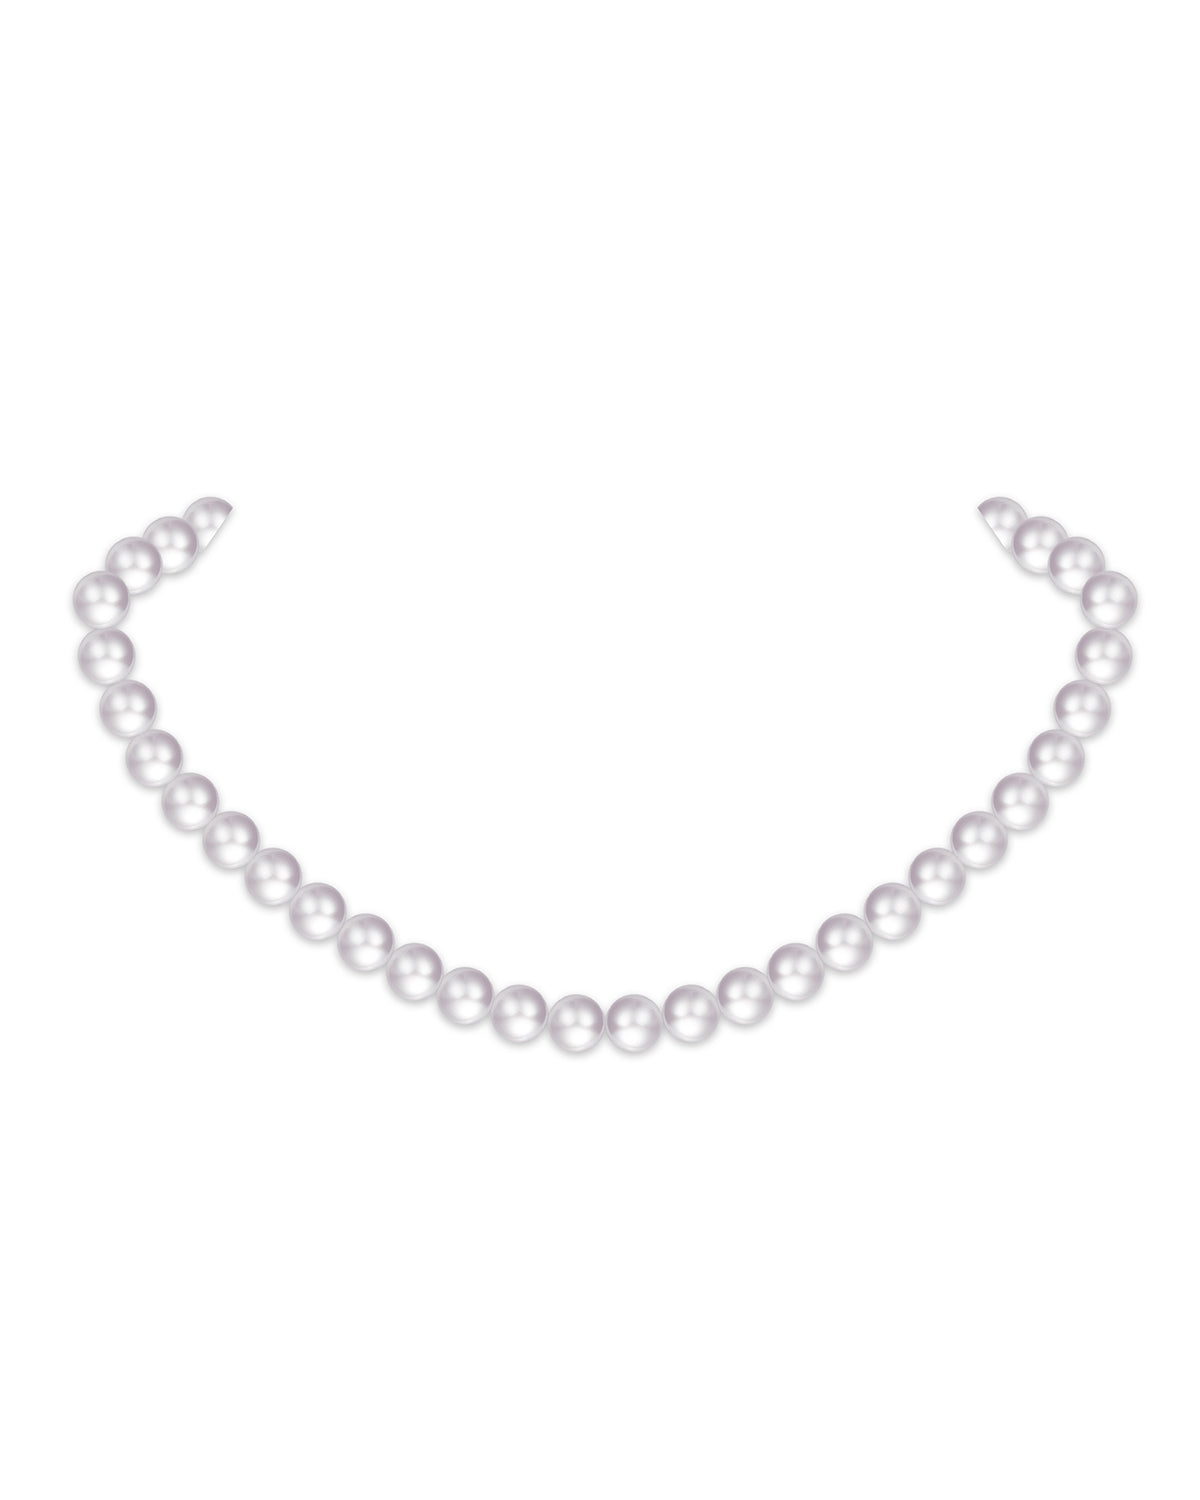 7.5-8.0mm Japanese Akoya White Pearl Necklace- AAA Quality